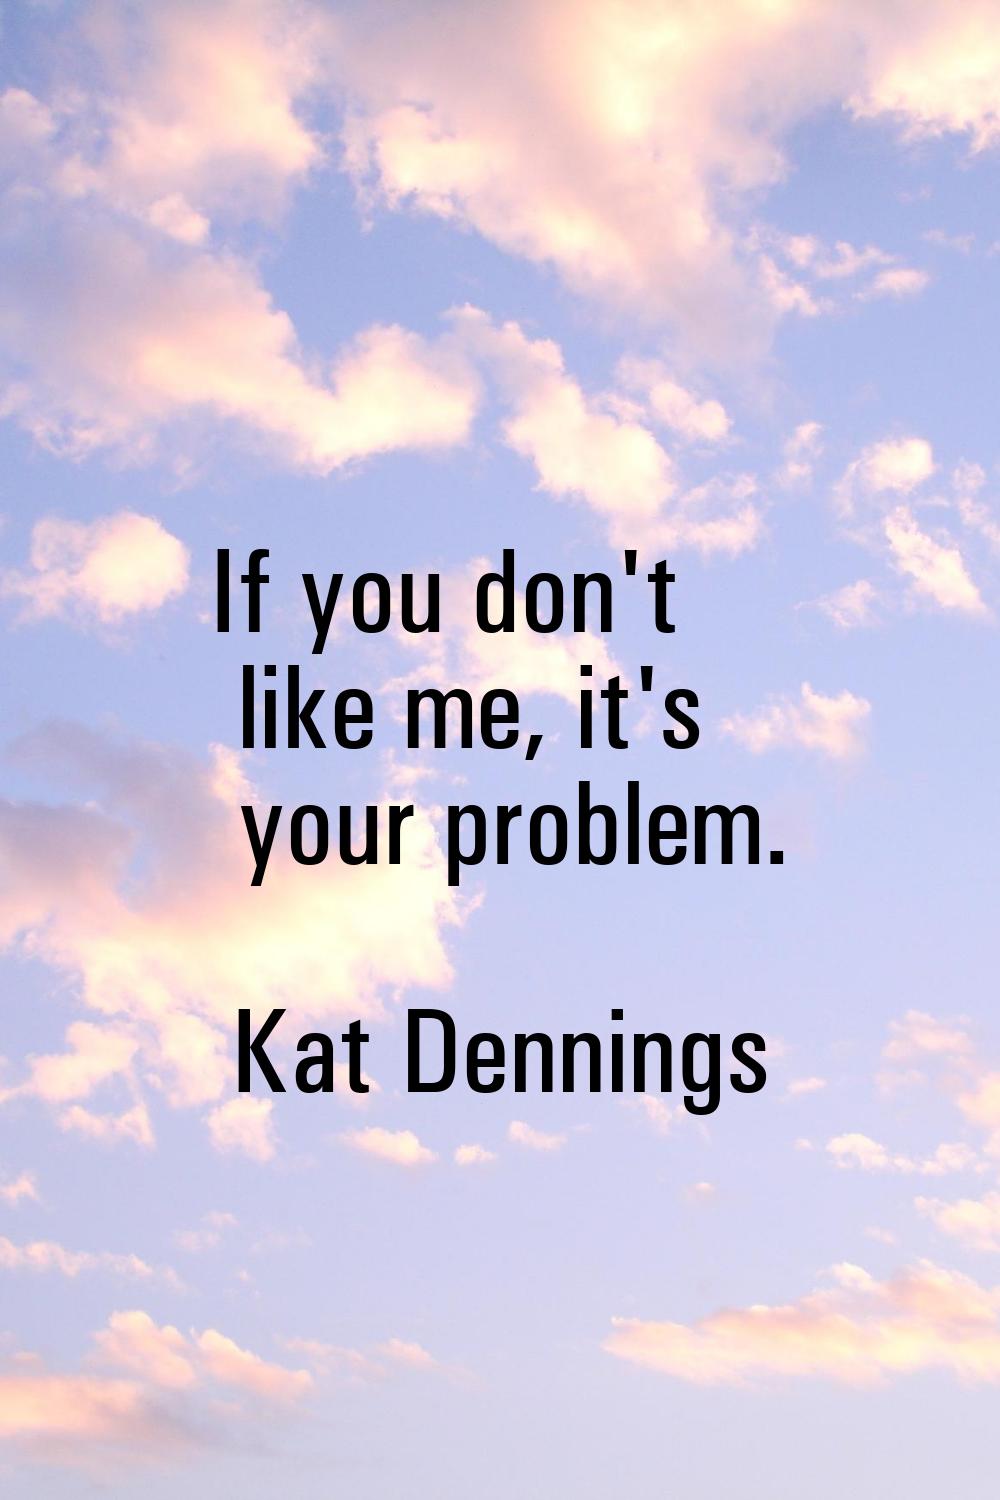 If you don't like me, it's your problem.